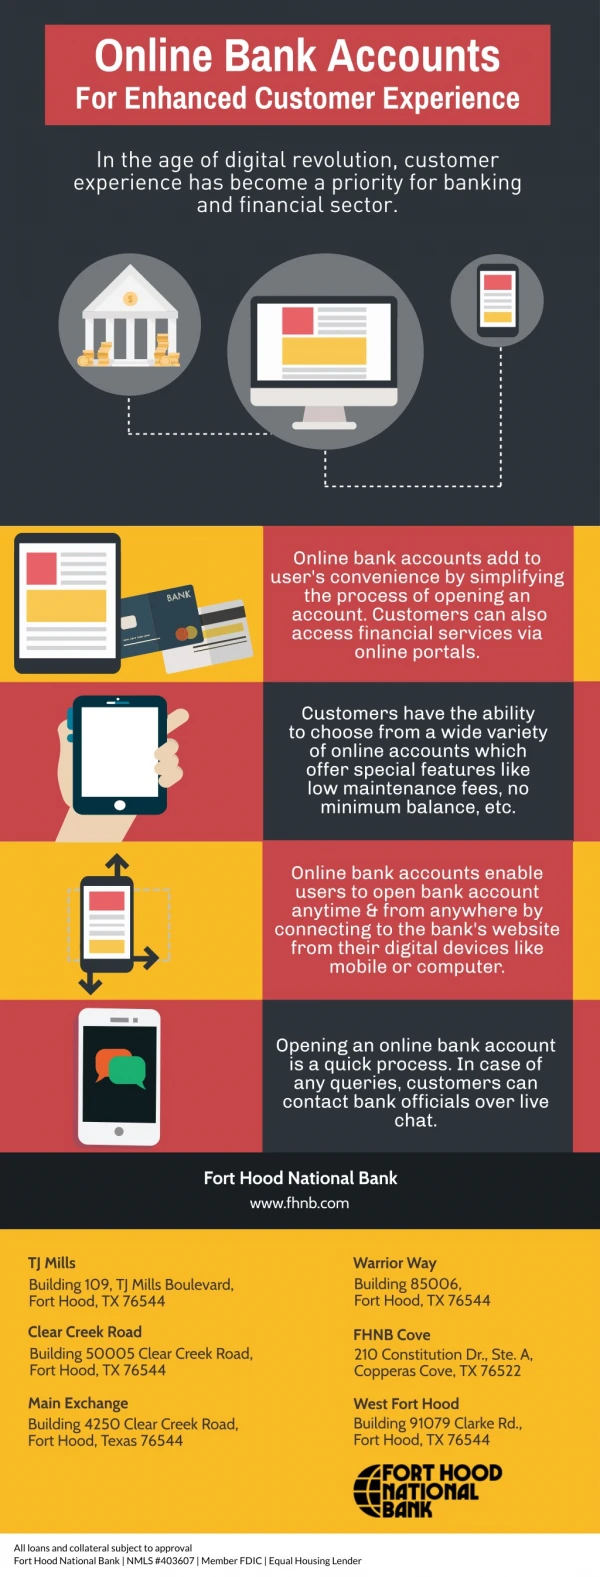 Online Bank Accounts For Enhanced Customer Experience